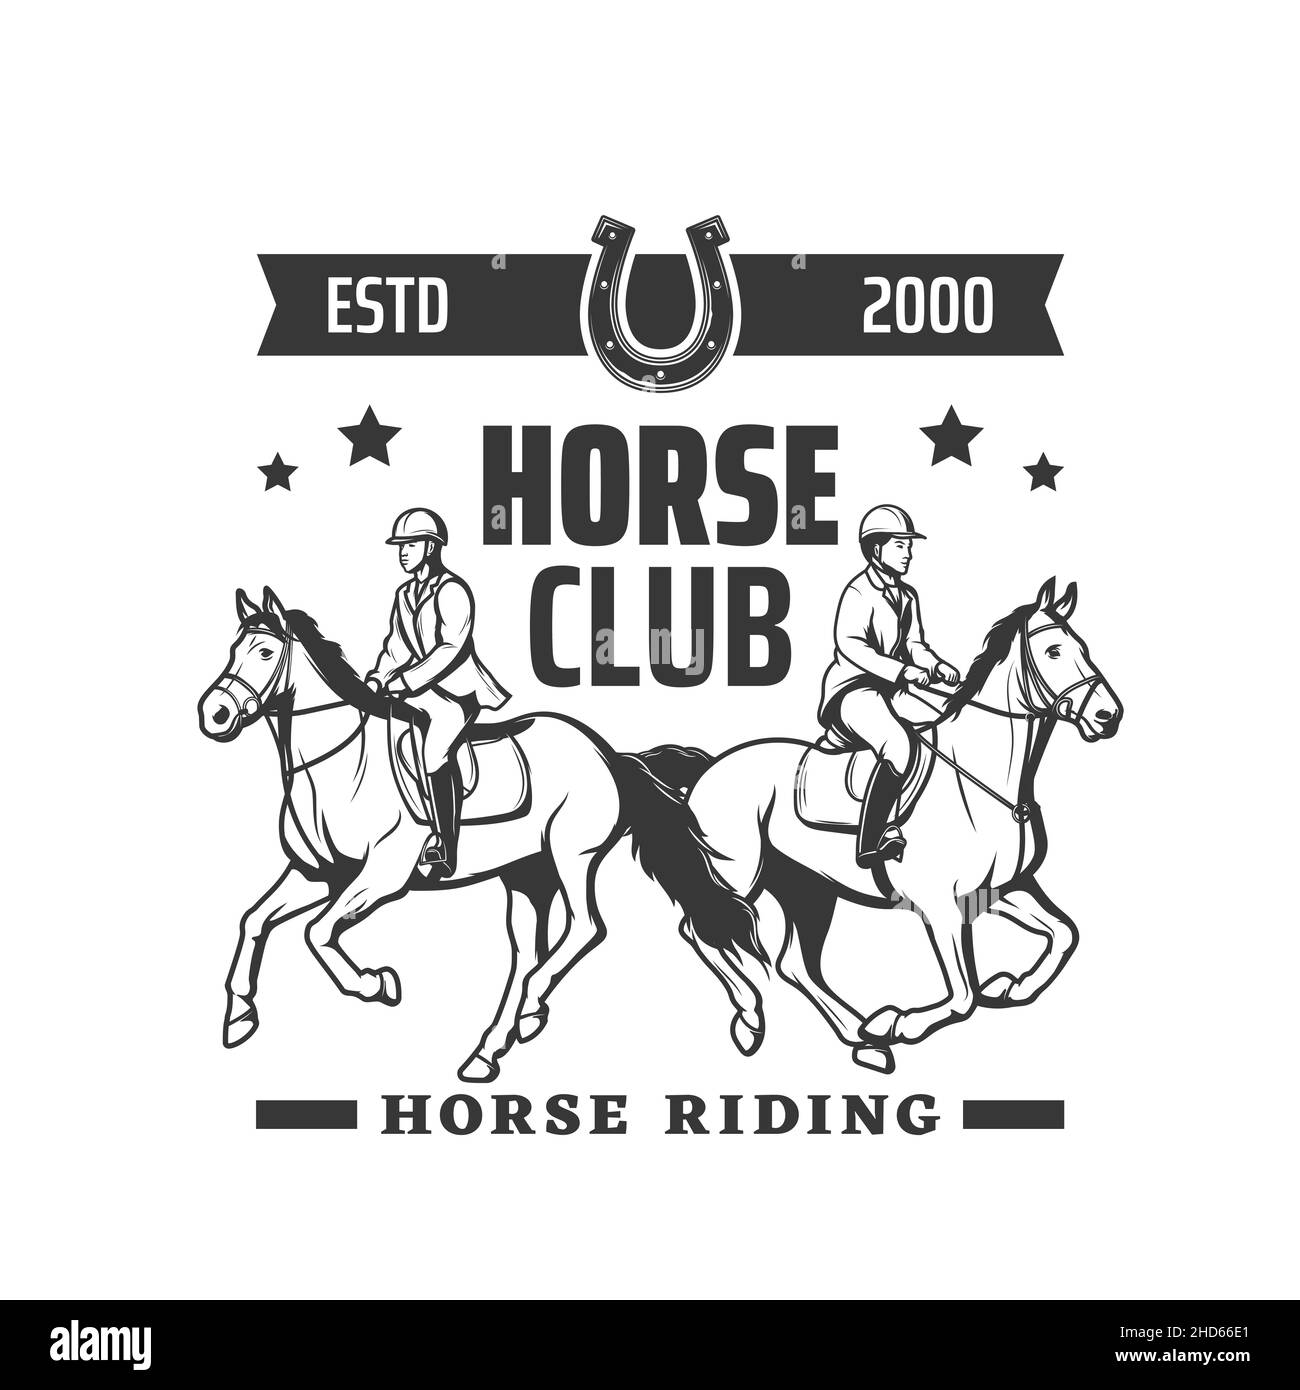 Equestrian sport vector icon of horse riding club design. Racing horses and jockeys isolated symbol with racehorses, horseshoe and horseback rider hel Stock Vector